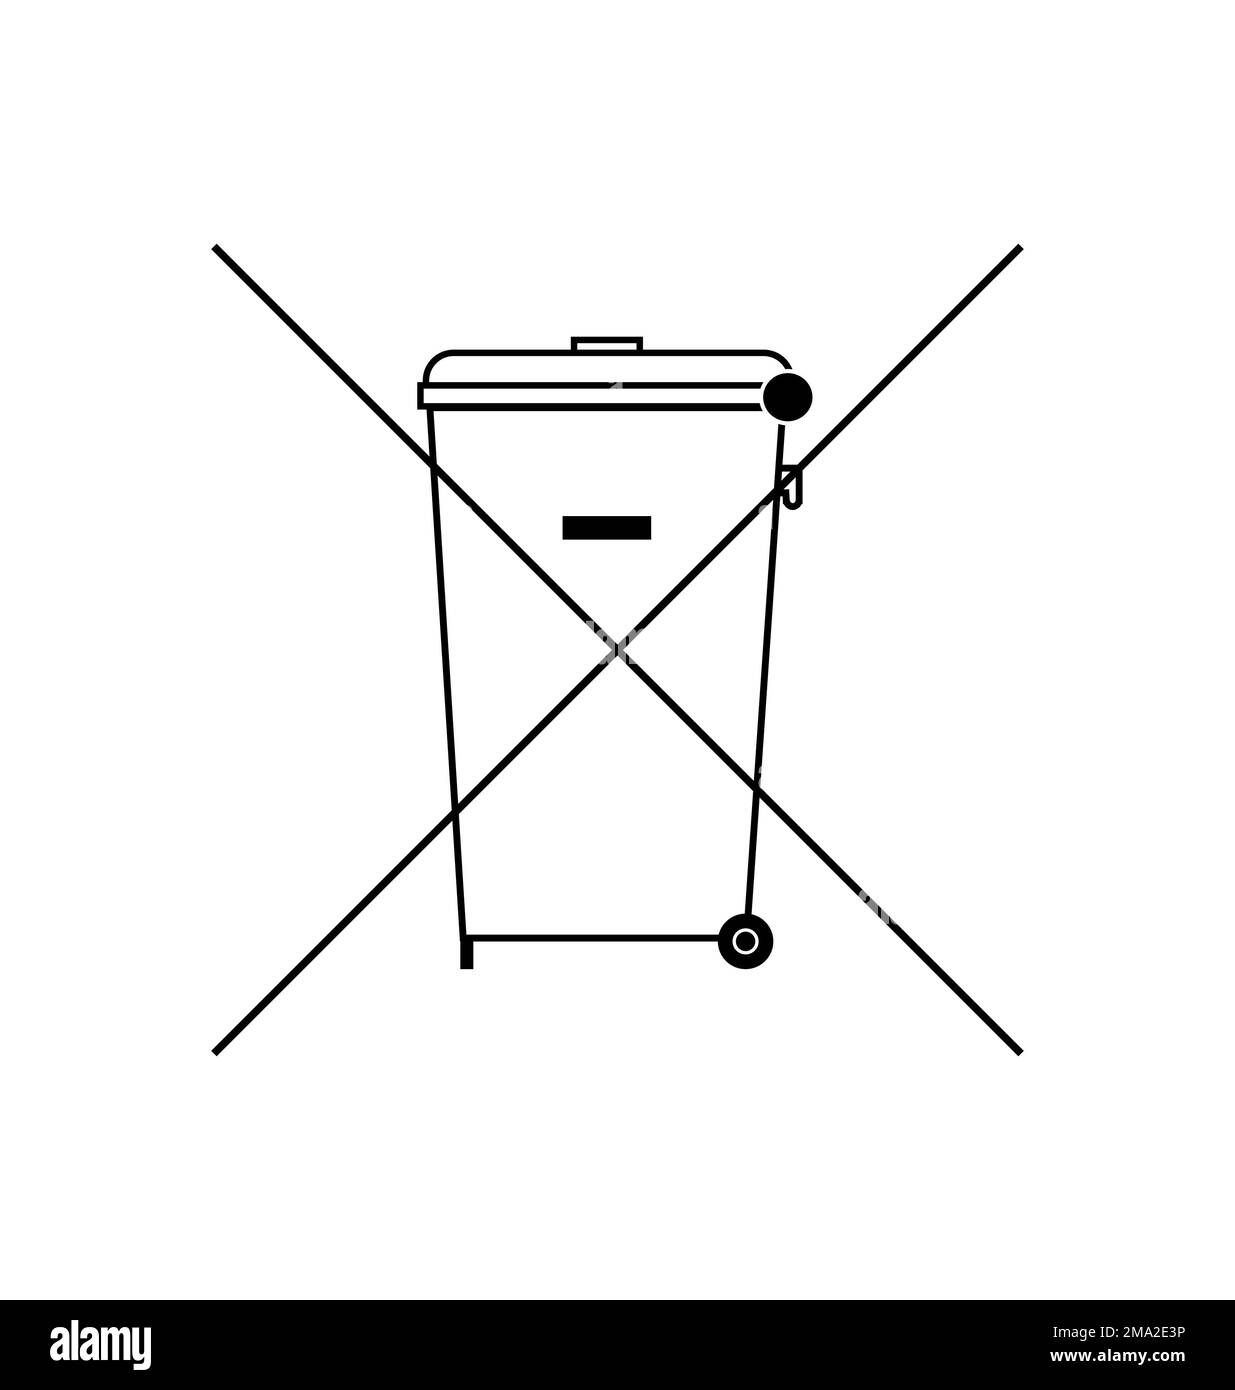 The Crossed Out Wheelie Bin Symbol , Waste Electrical and Electronic Equipment recycling sign. Do not throw in trash. Trash bin icon Stock Photo